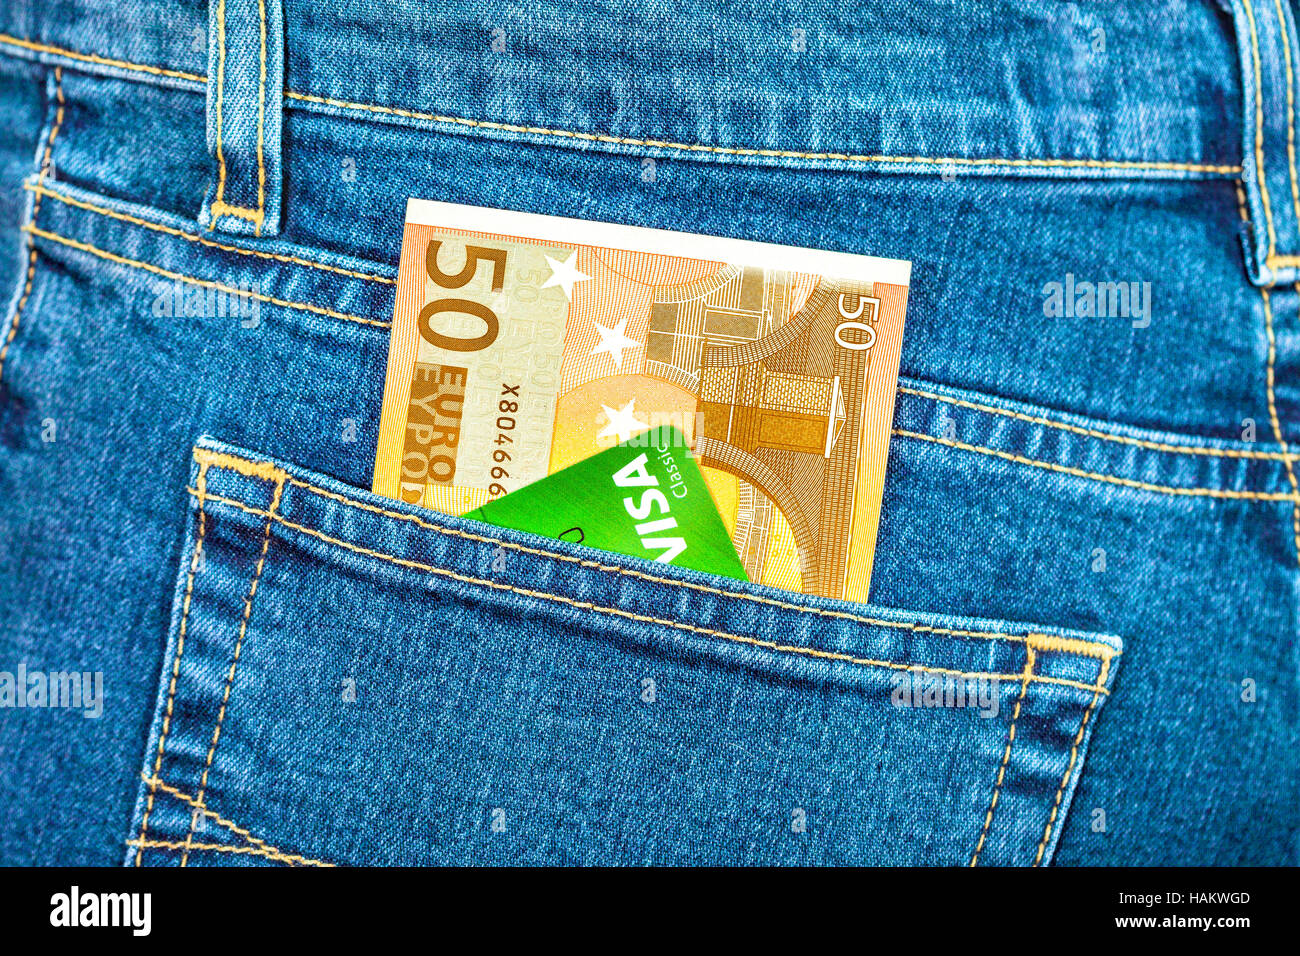 Banknote 50 euro and credit card Visa in back jeans pocket Stock Photo -  Alamy